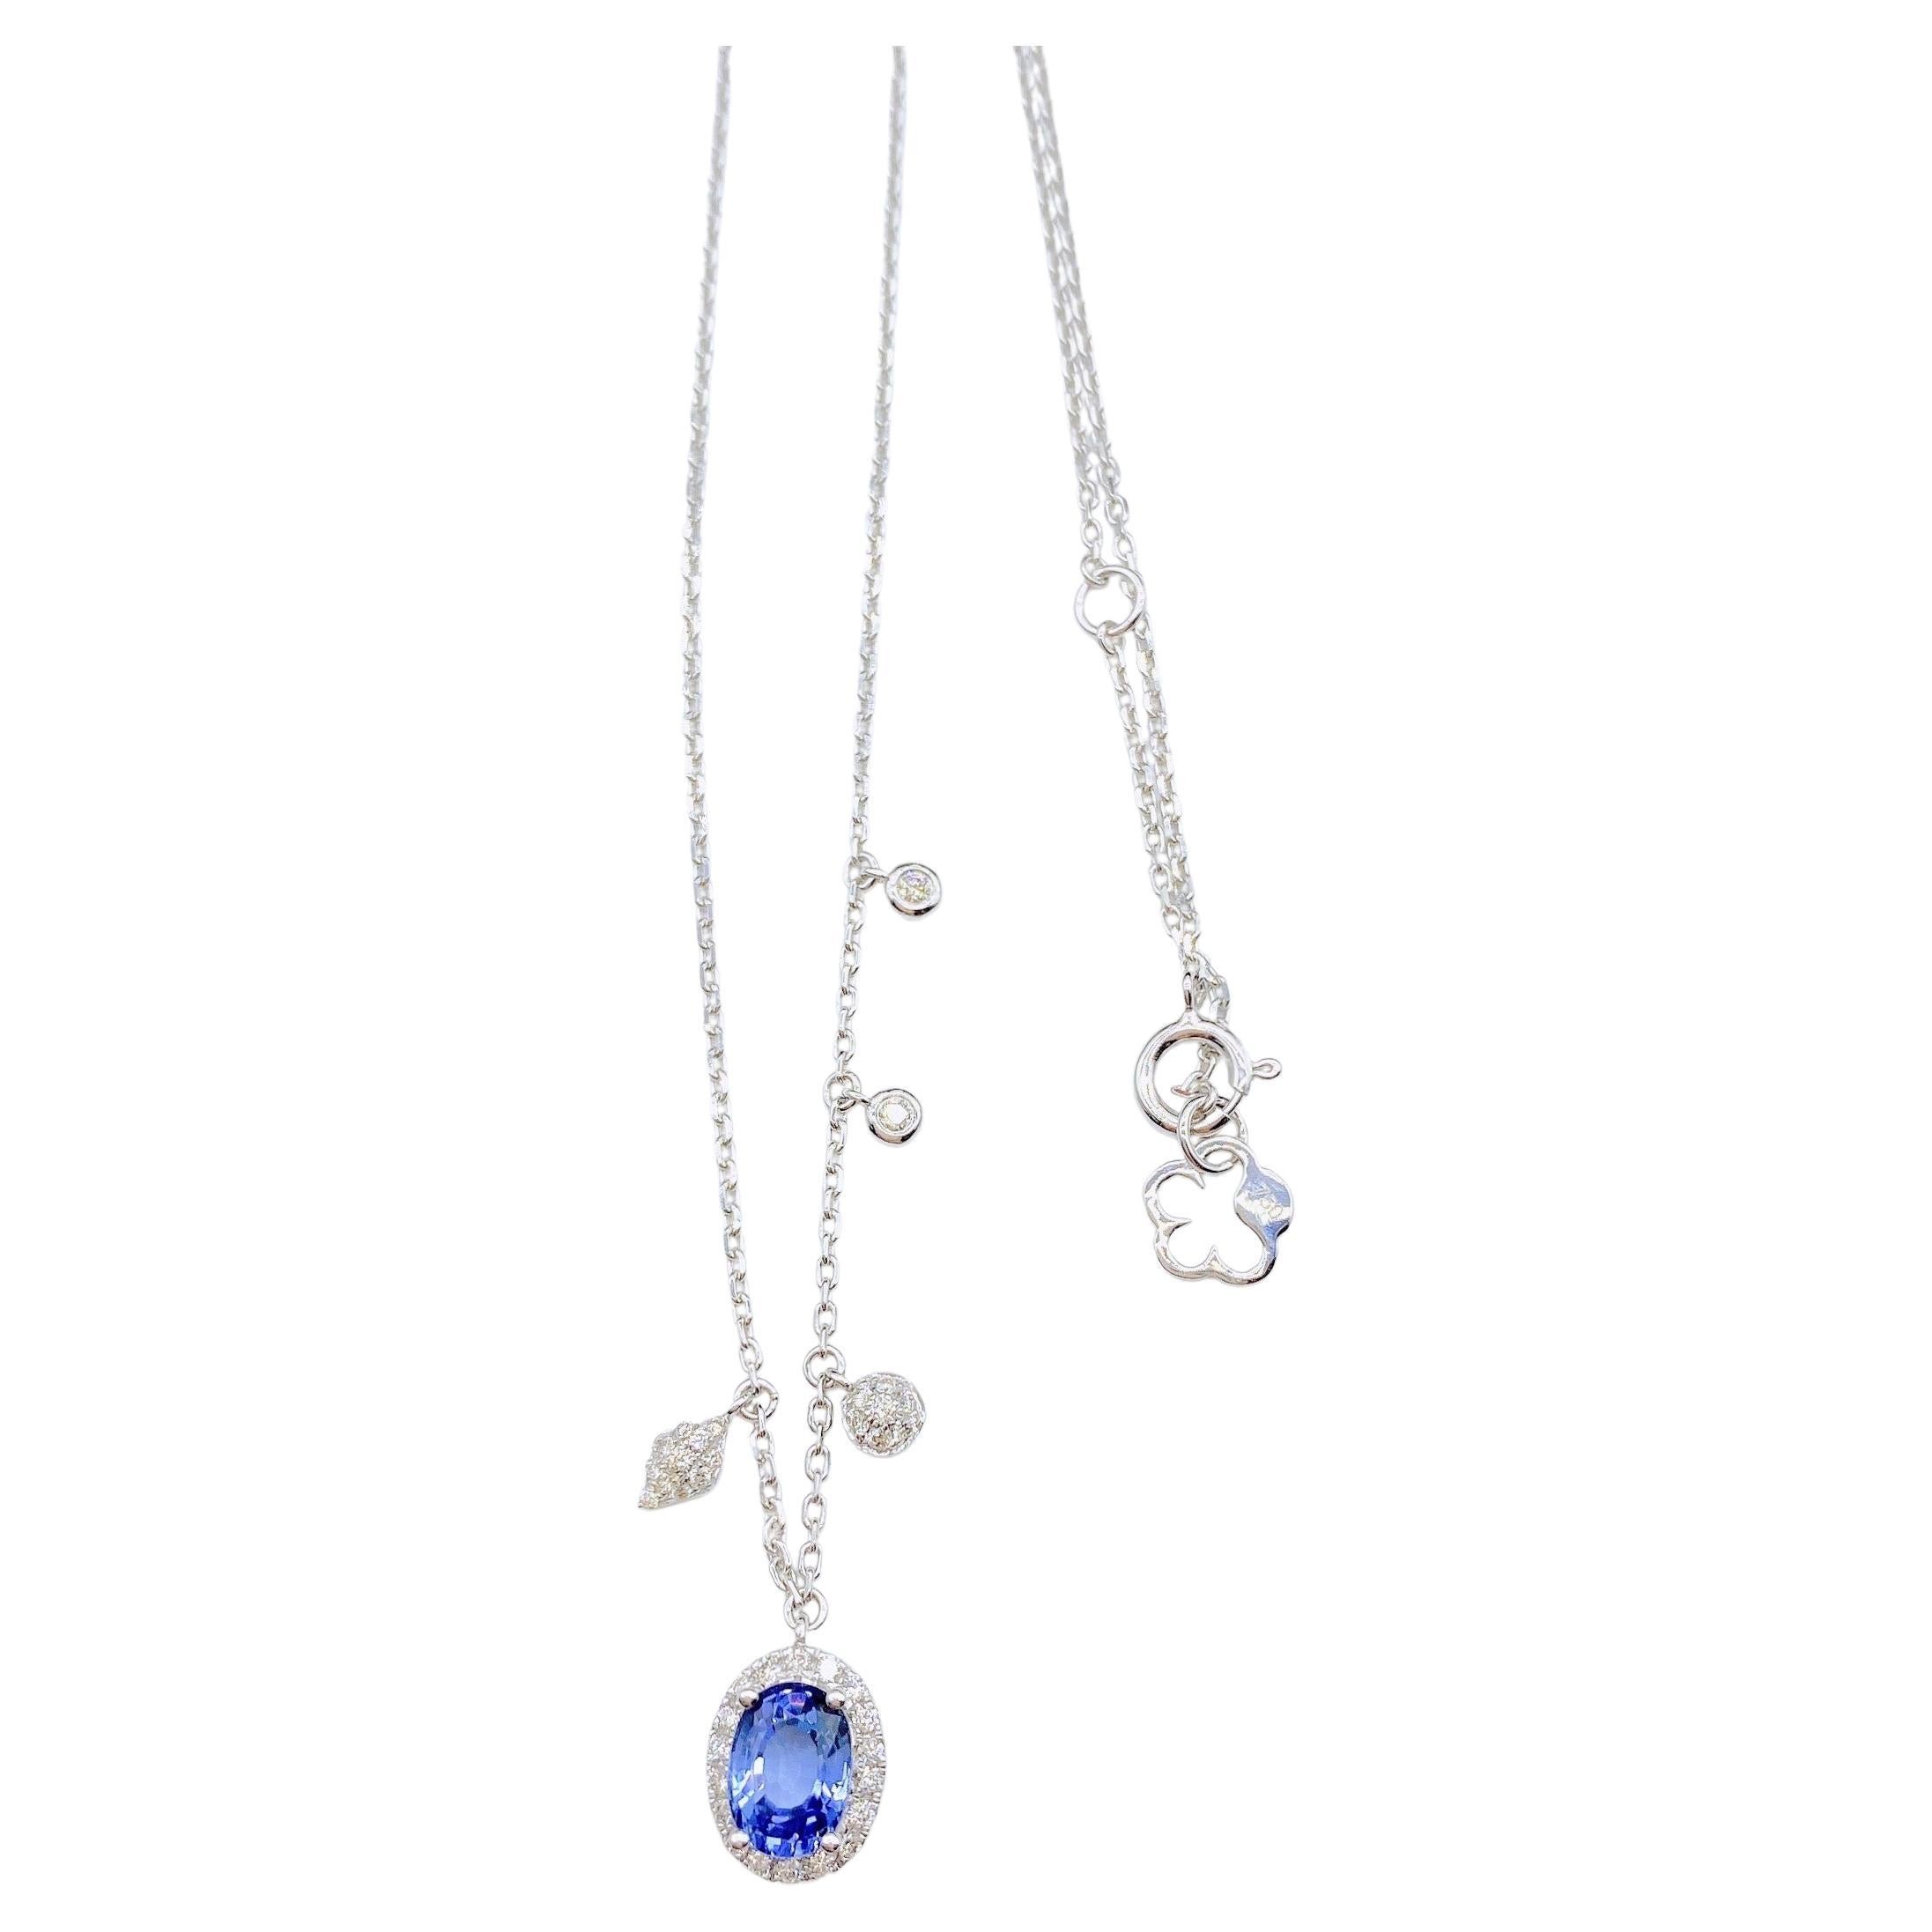 $4, 119 Stunning 18Kt Gold Gorgeous Blue Sapphire and Diamond Pendant Necklace For Sale